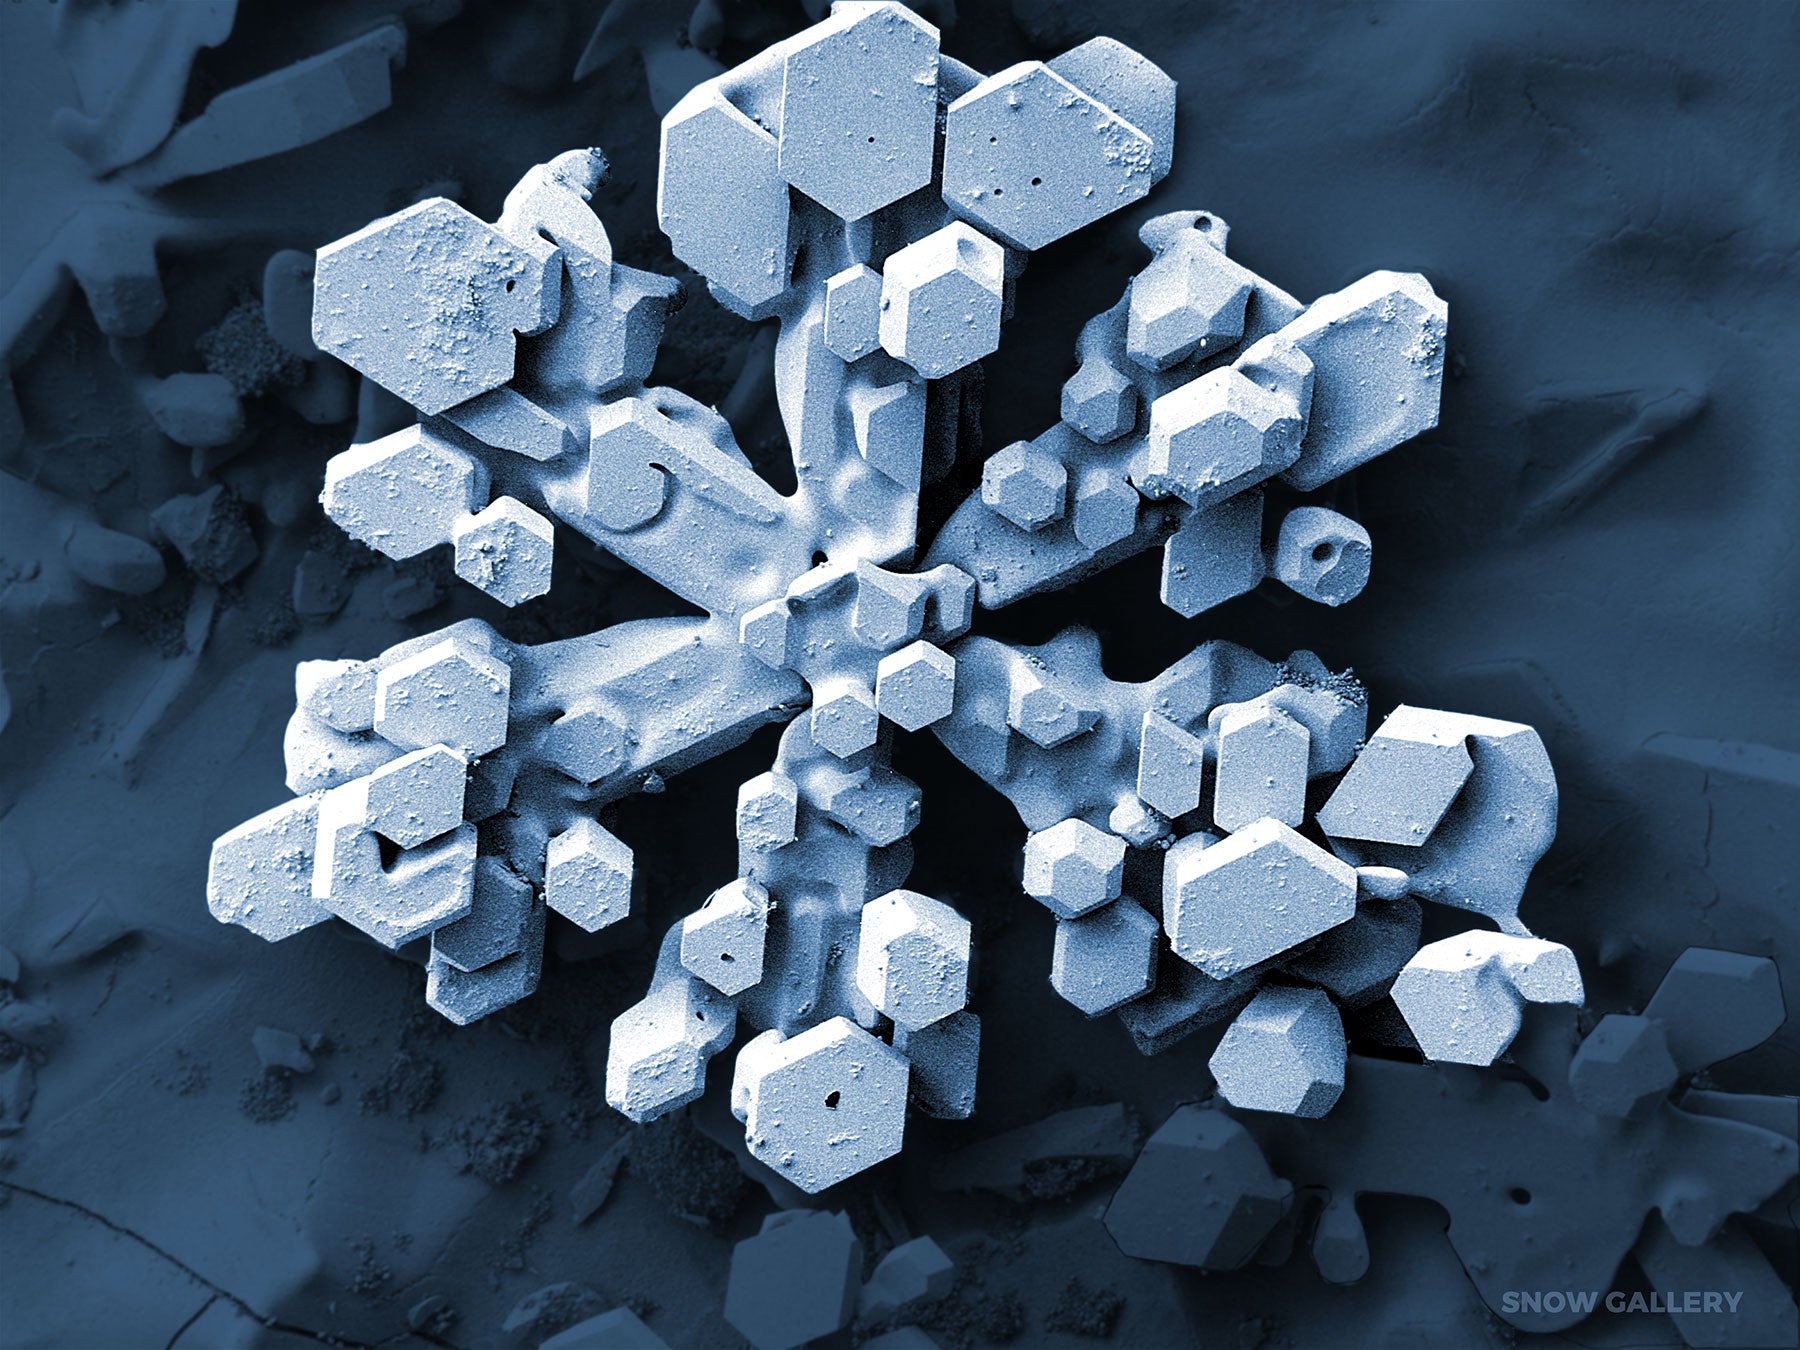 electron microscope images snow